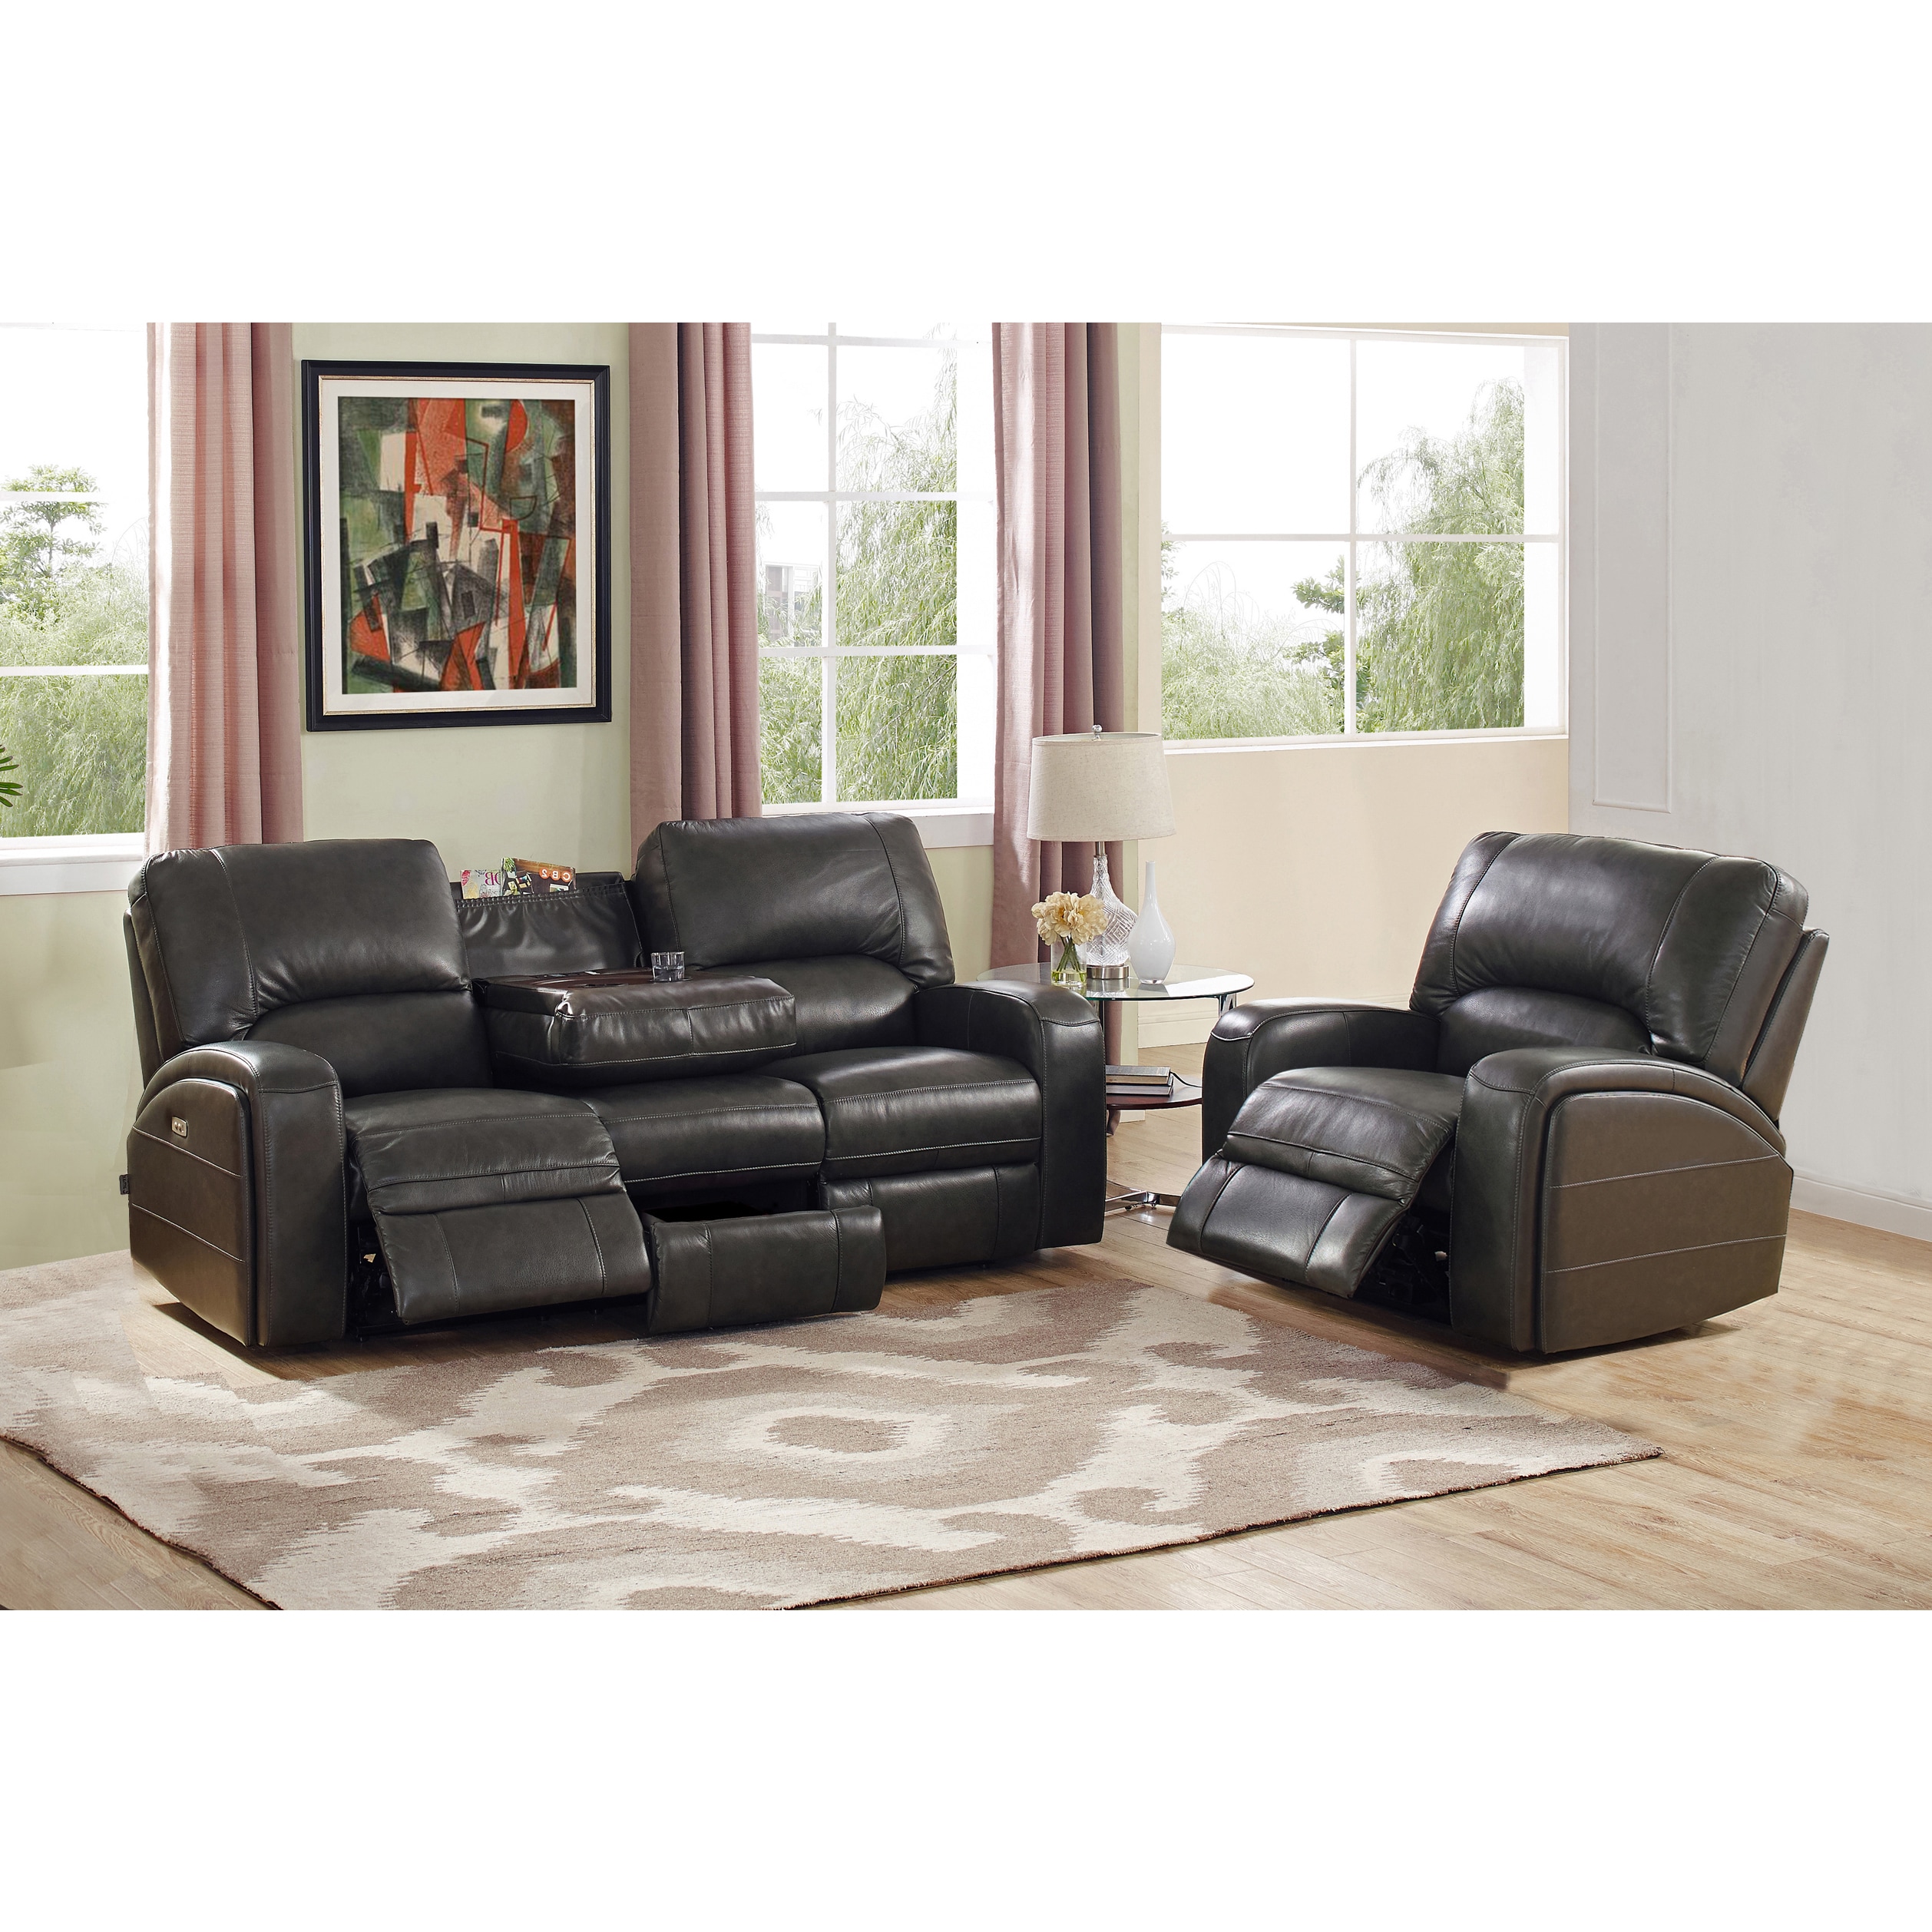 Hydeline by Amax Newcastle Top Grain Leather Power Reclining Sofa